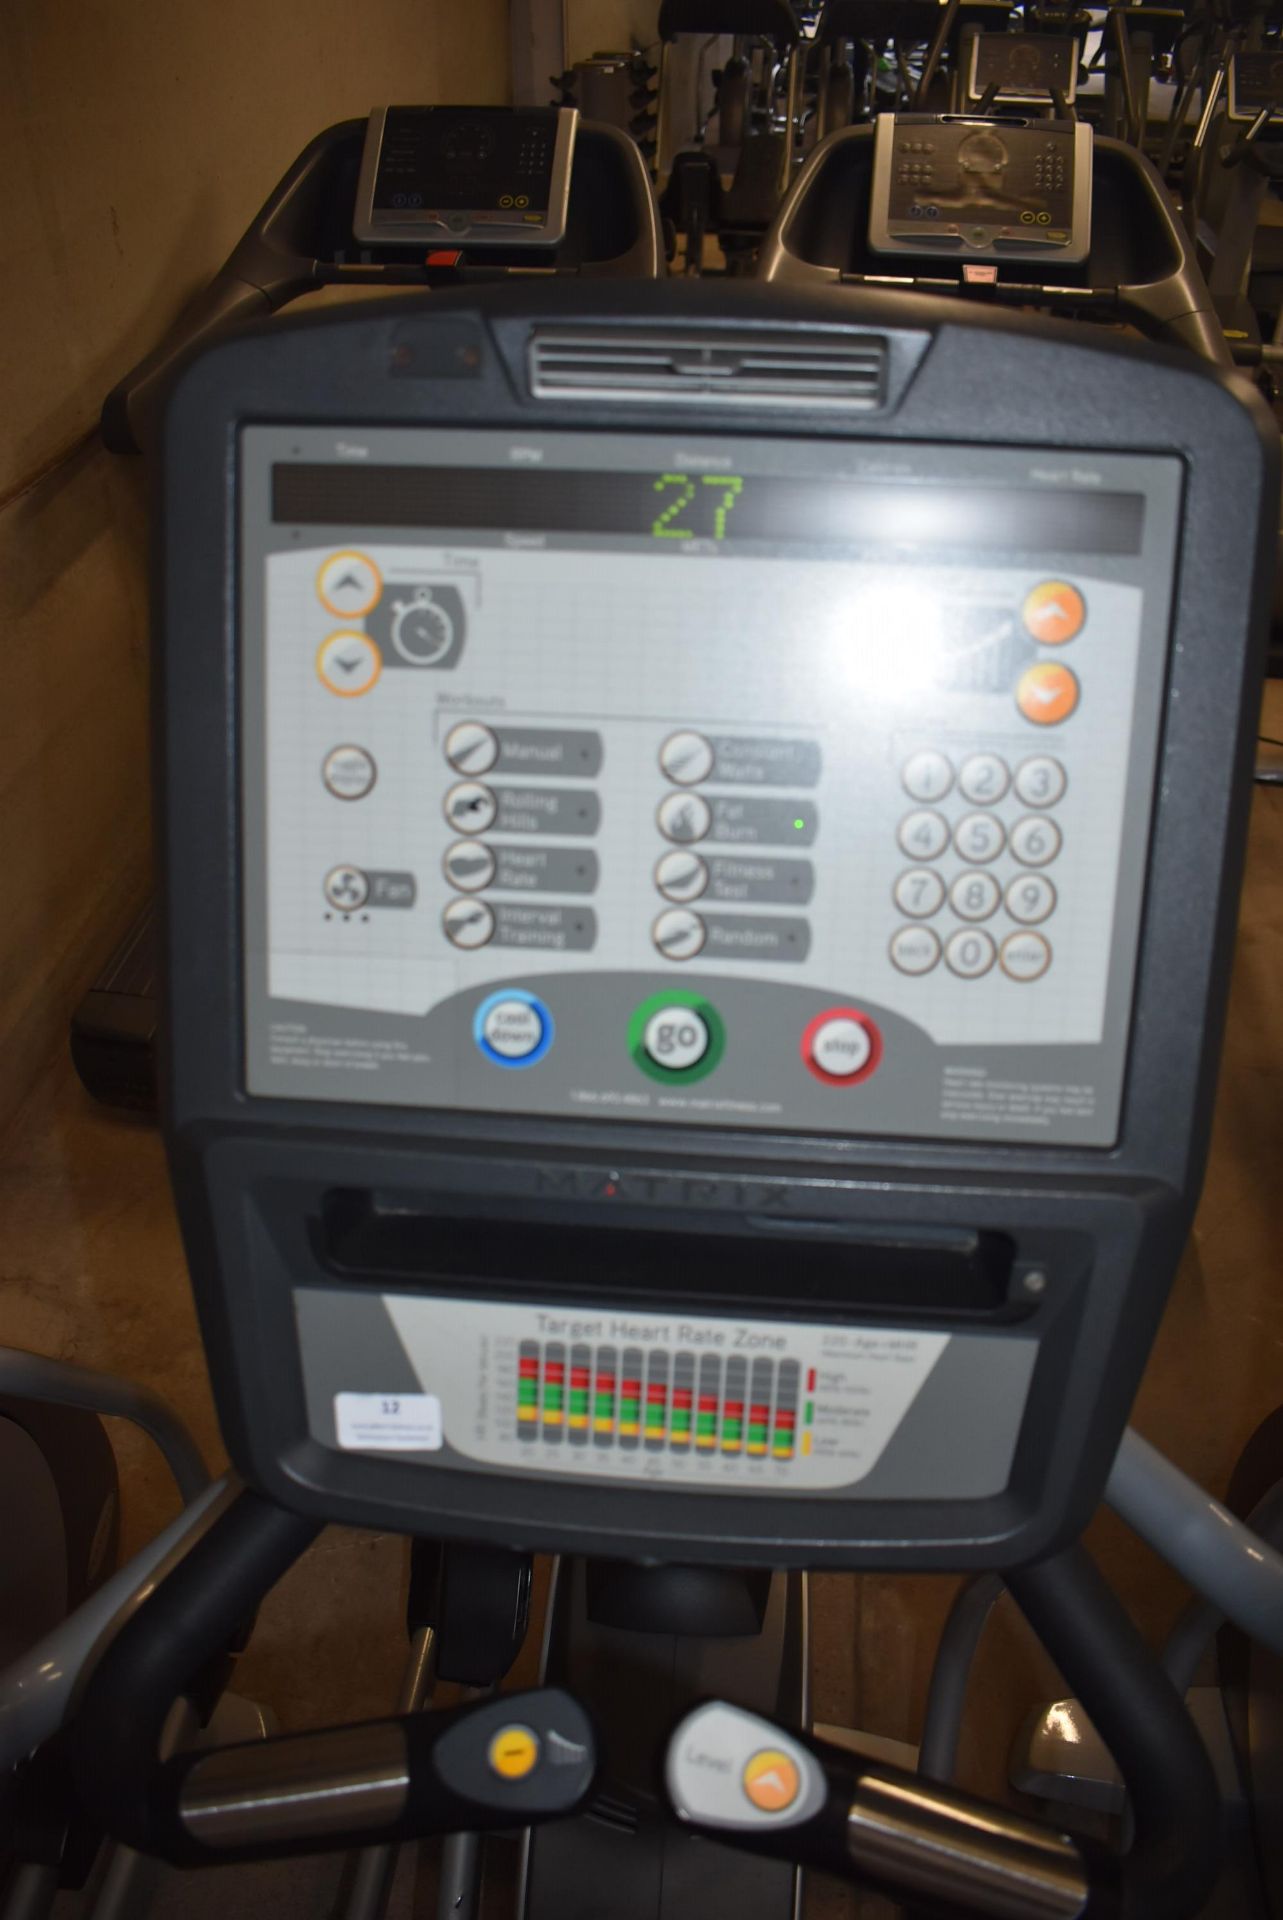 *Matrix Ascents Cross Trainer with EHRU5X Console - Image 2 of 2